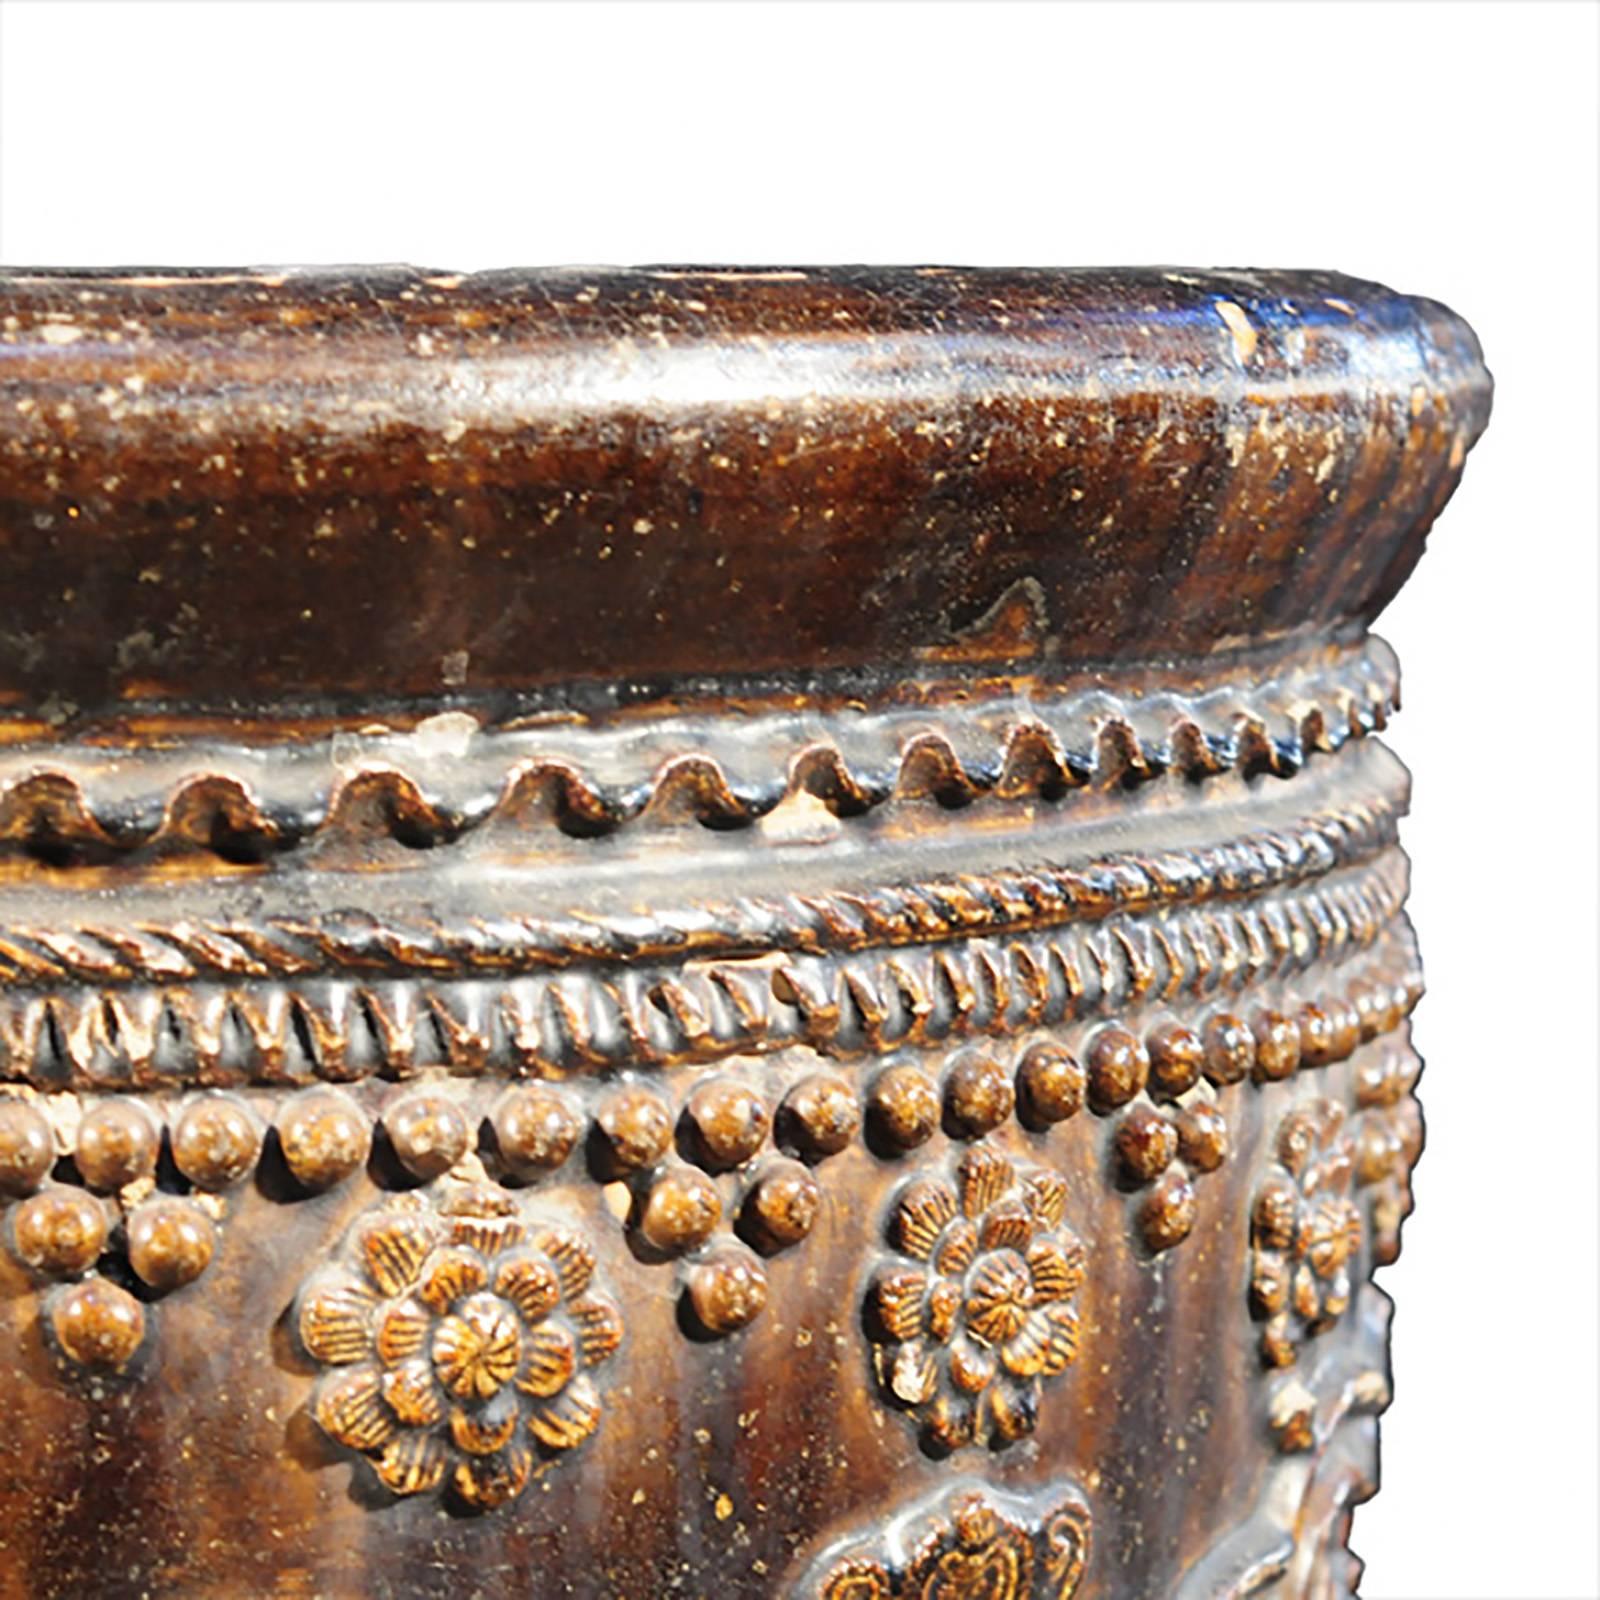 This unique glazed jar was handcrafted in northern China over a century ago, during the Qing Dynasty. It is decorated with stunningly detailed relief designs, the flowers have individualized petals, the cherry blossom branches are finely textured